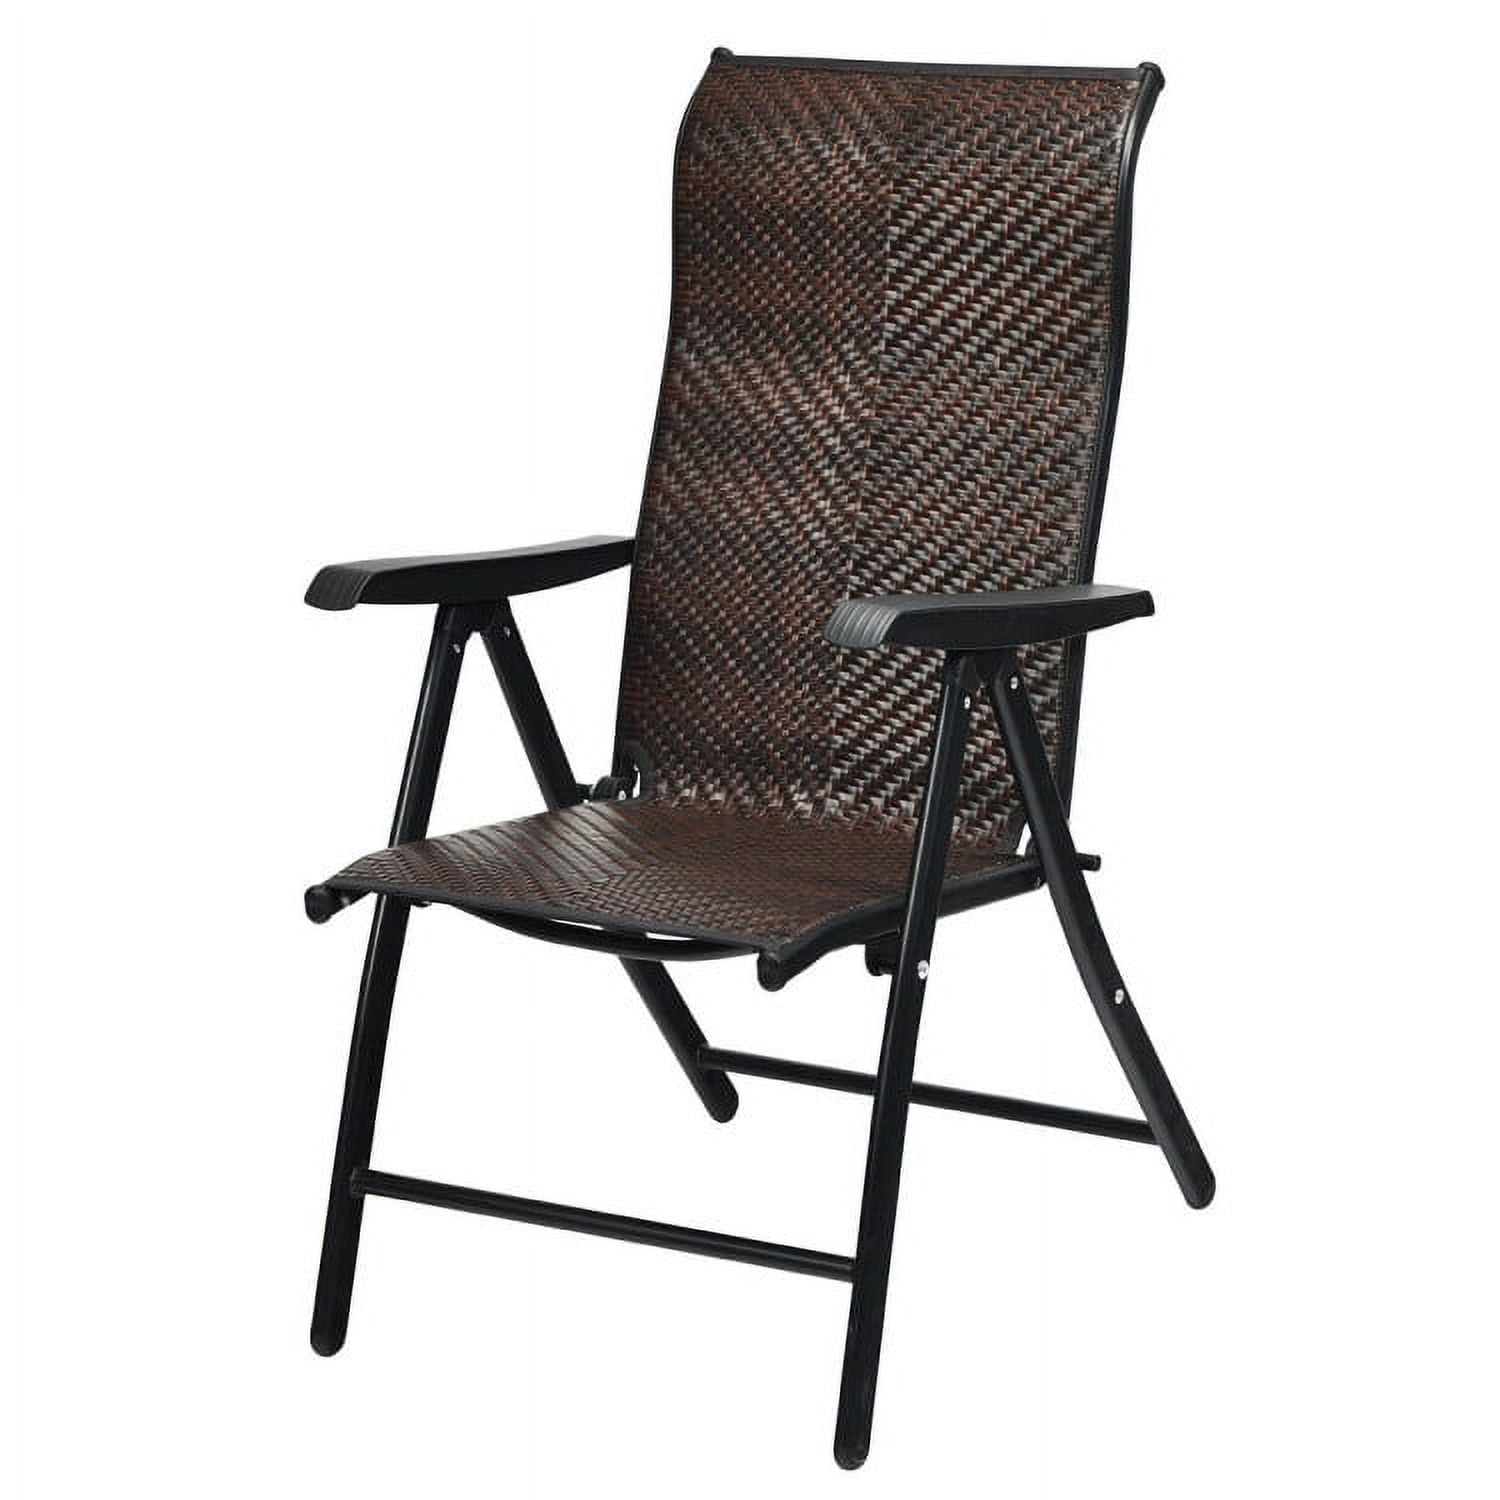 Aimee Lii Patio Rattan Folding Chair with Armrest, Outdoor Folding Chairs